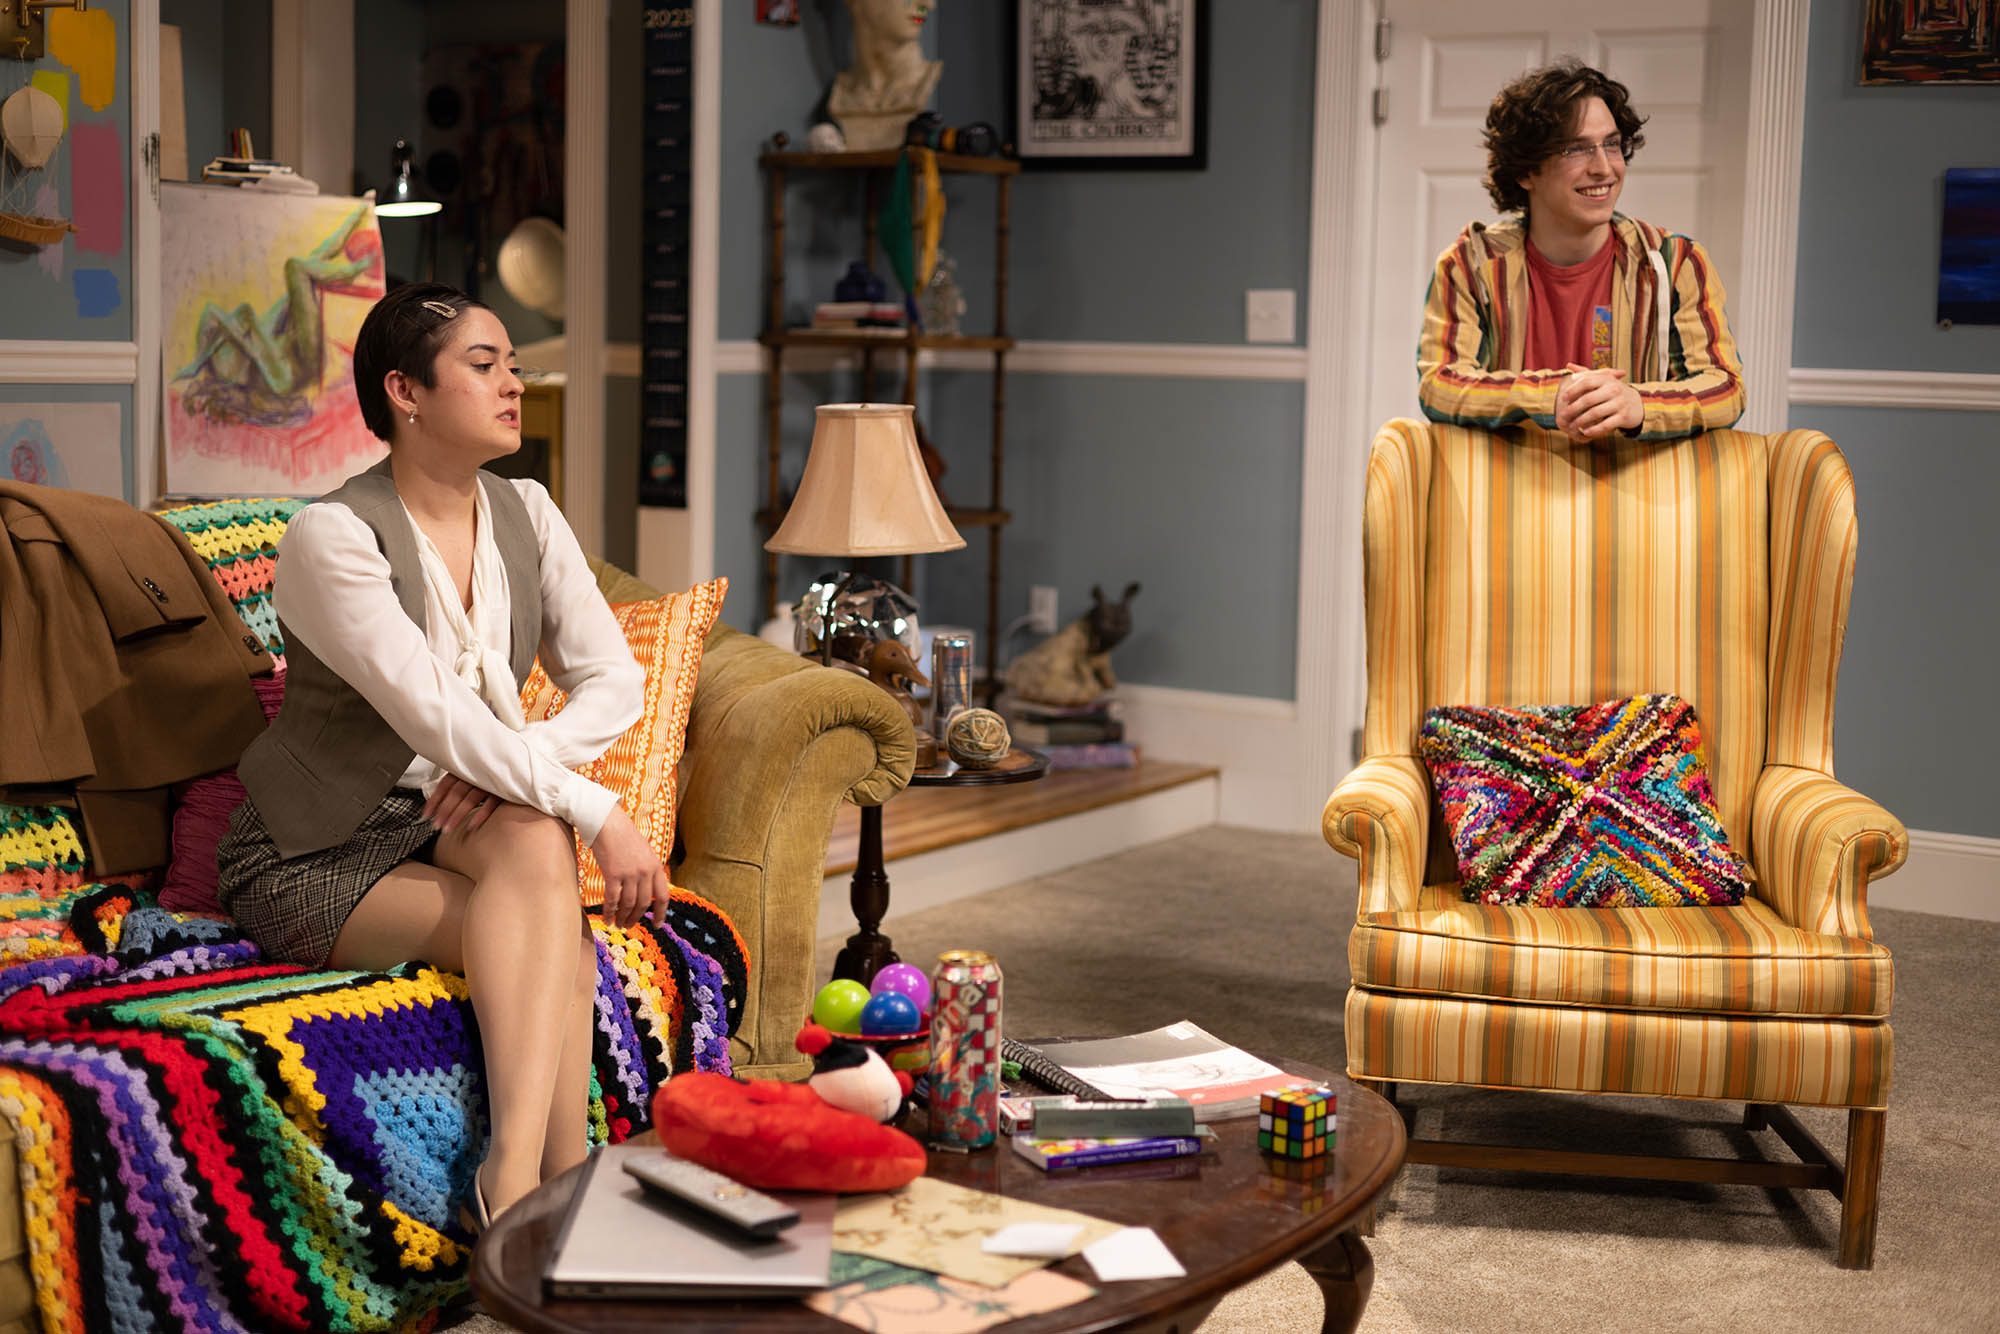 Photo: Phil (Right) and Barb Shipley, played by Tyler Statkevicus (CFA’23) and Acsa Welker (CFA’23) look to the right as they chat and smile. Phil stands and leans on the back of a large yellow armchair as Barb sits on an olive green couch and sneers.